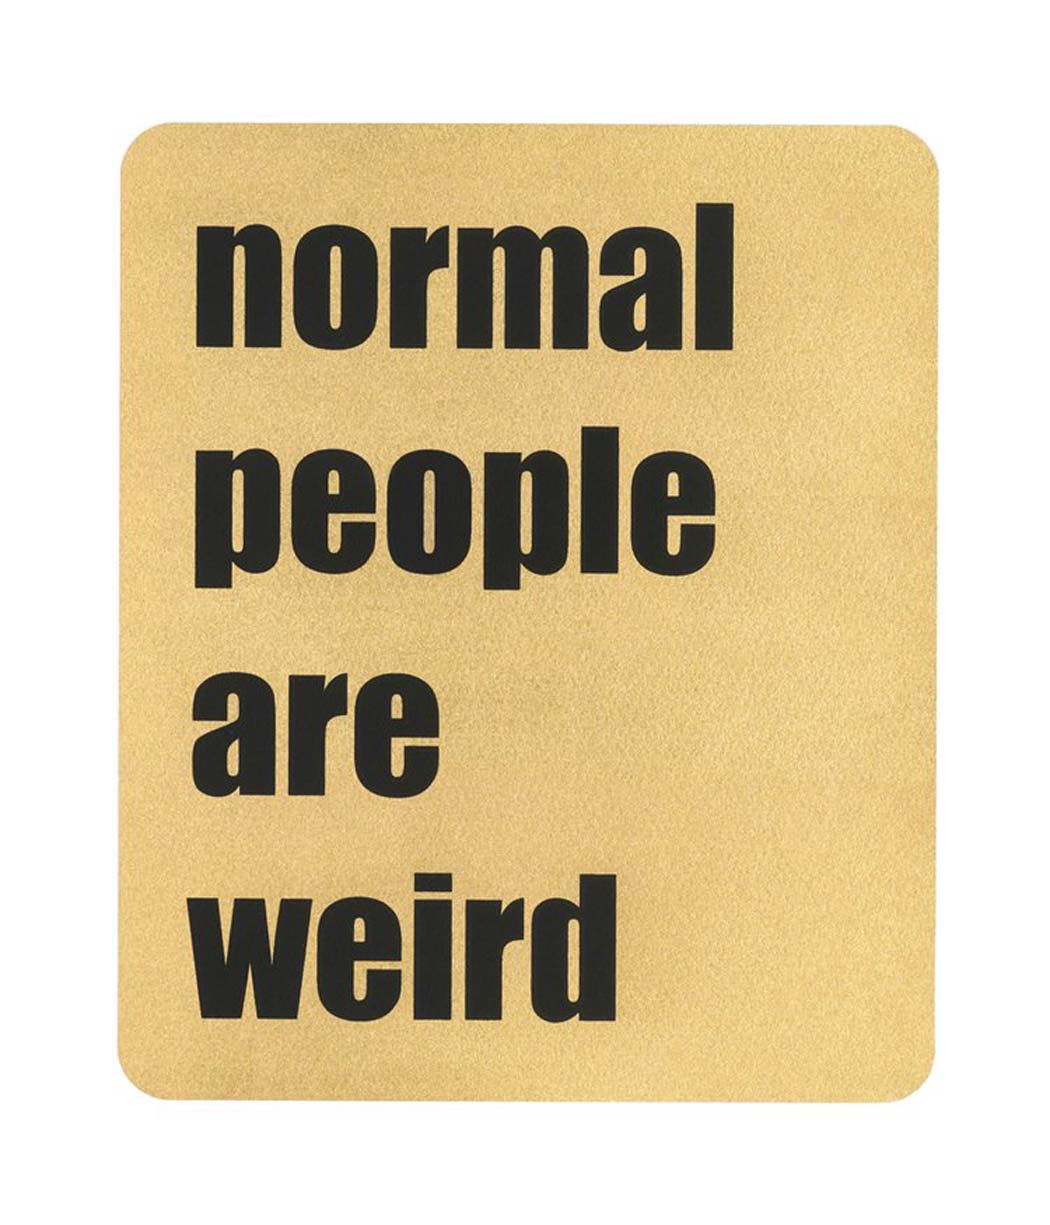 NORMAL PEOPLE ARE WEIRD - Black Enlarged